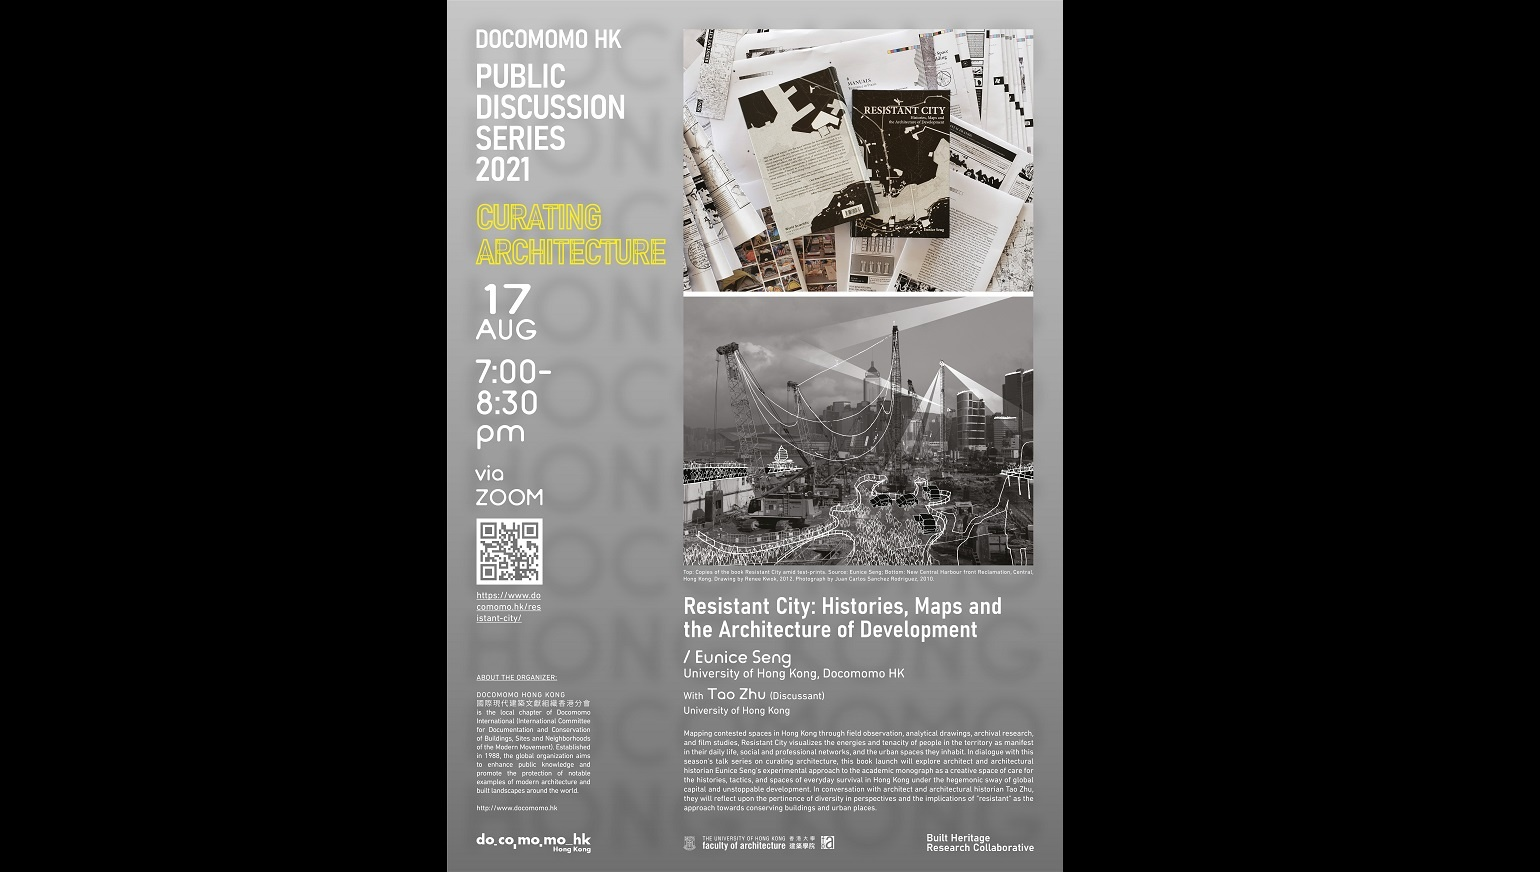 Resistant City: Histories, Maps and the Architecture of Development (Docomomo HK Public Discussion Series 2021)